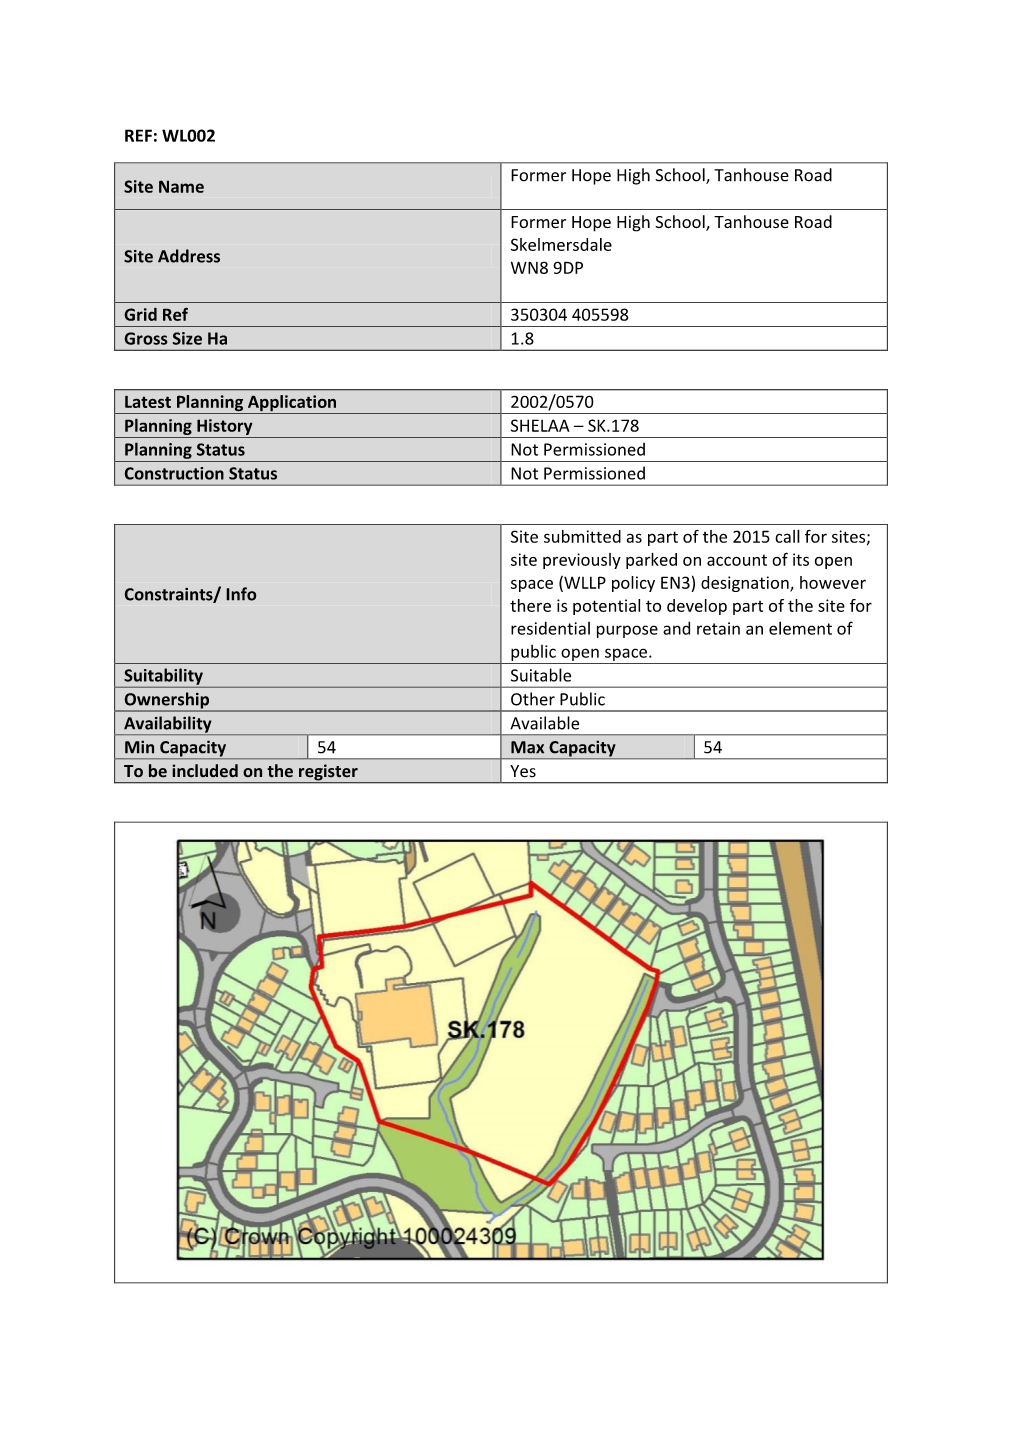 REF: WL002 Site Name Former Hope High School, Tanhouse Road Site